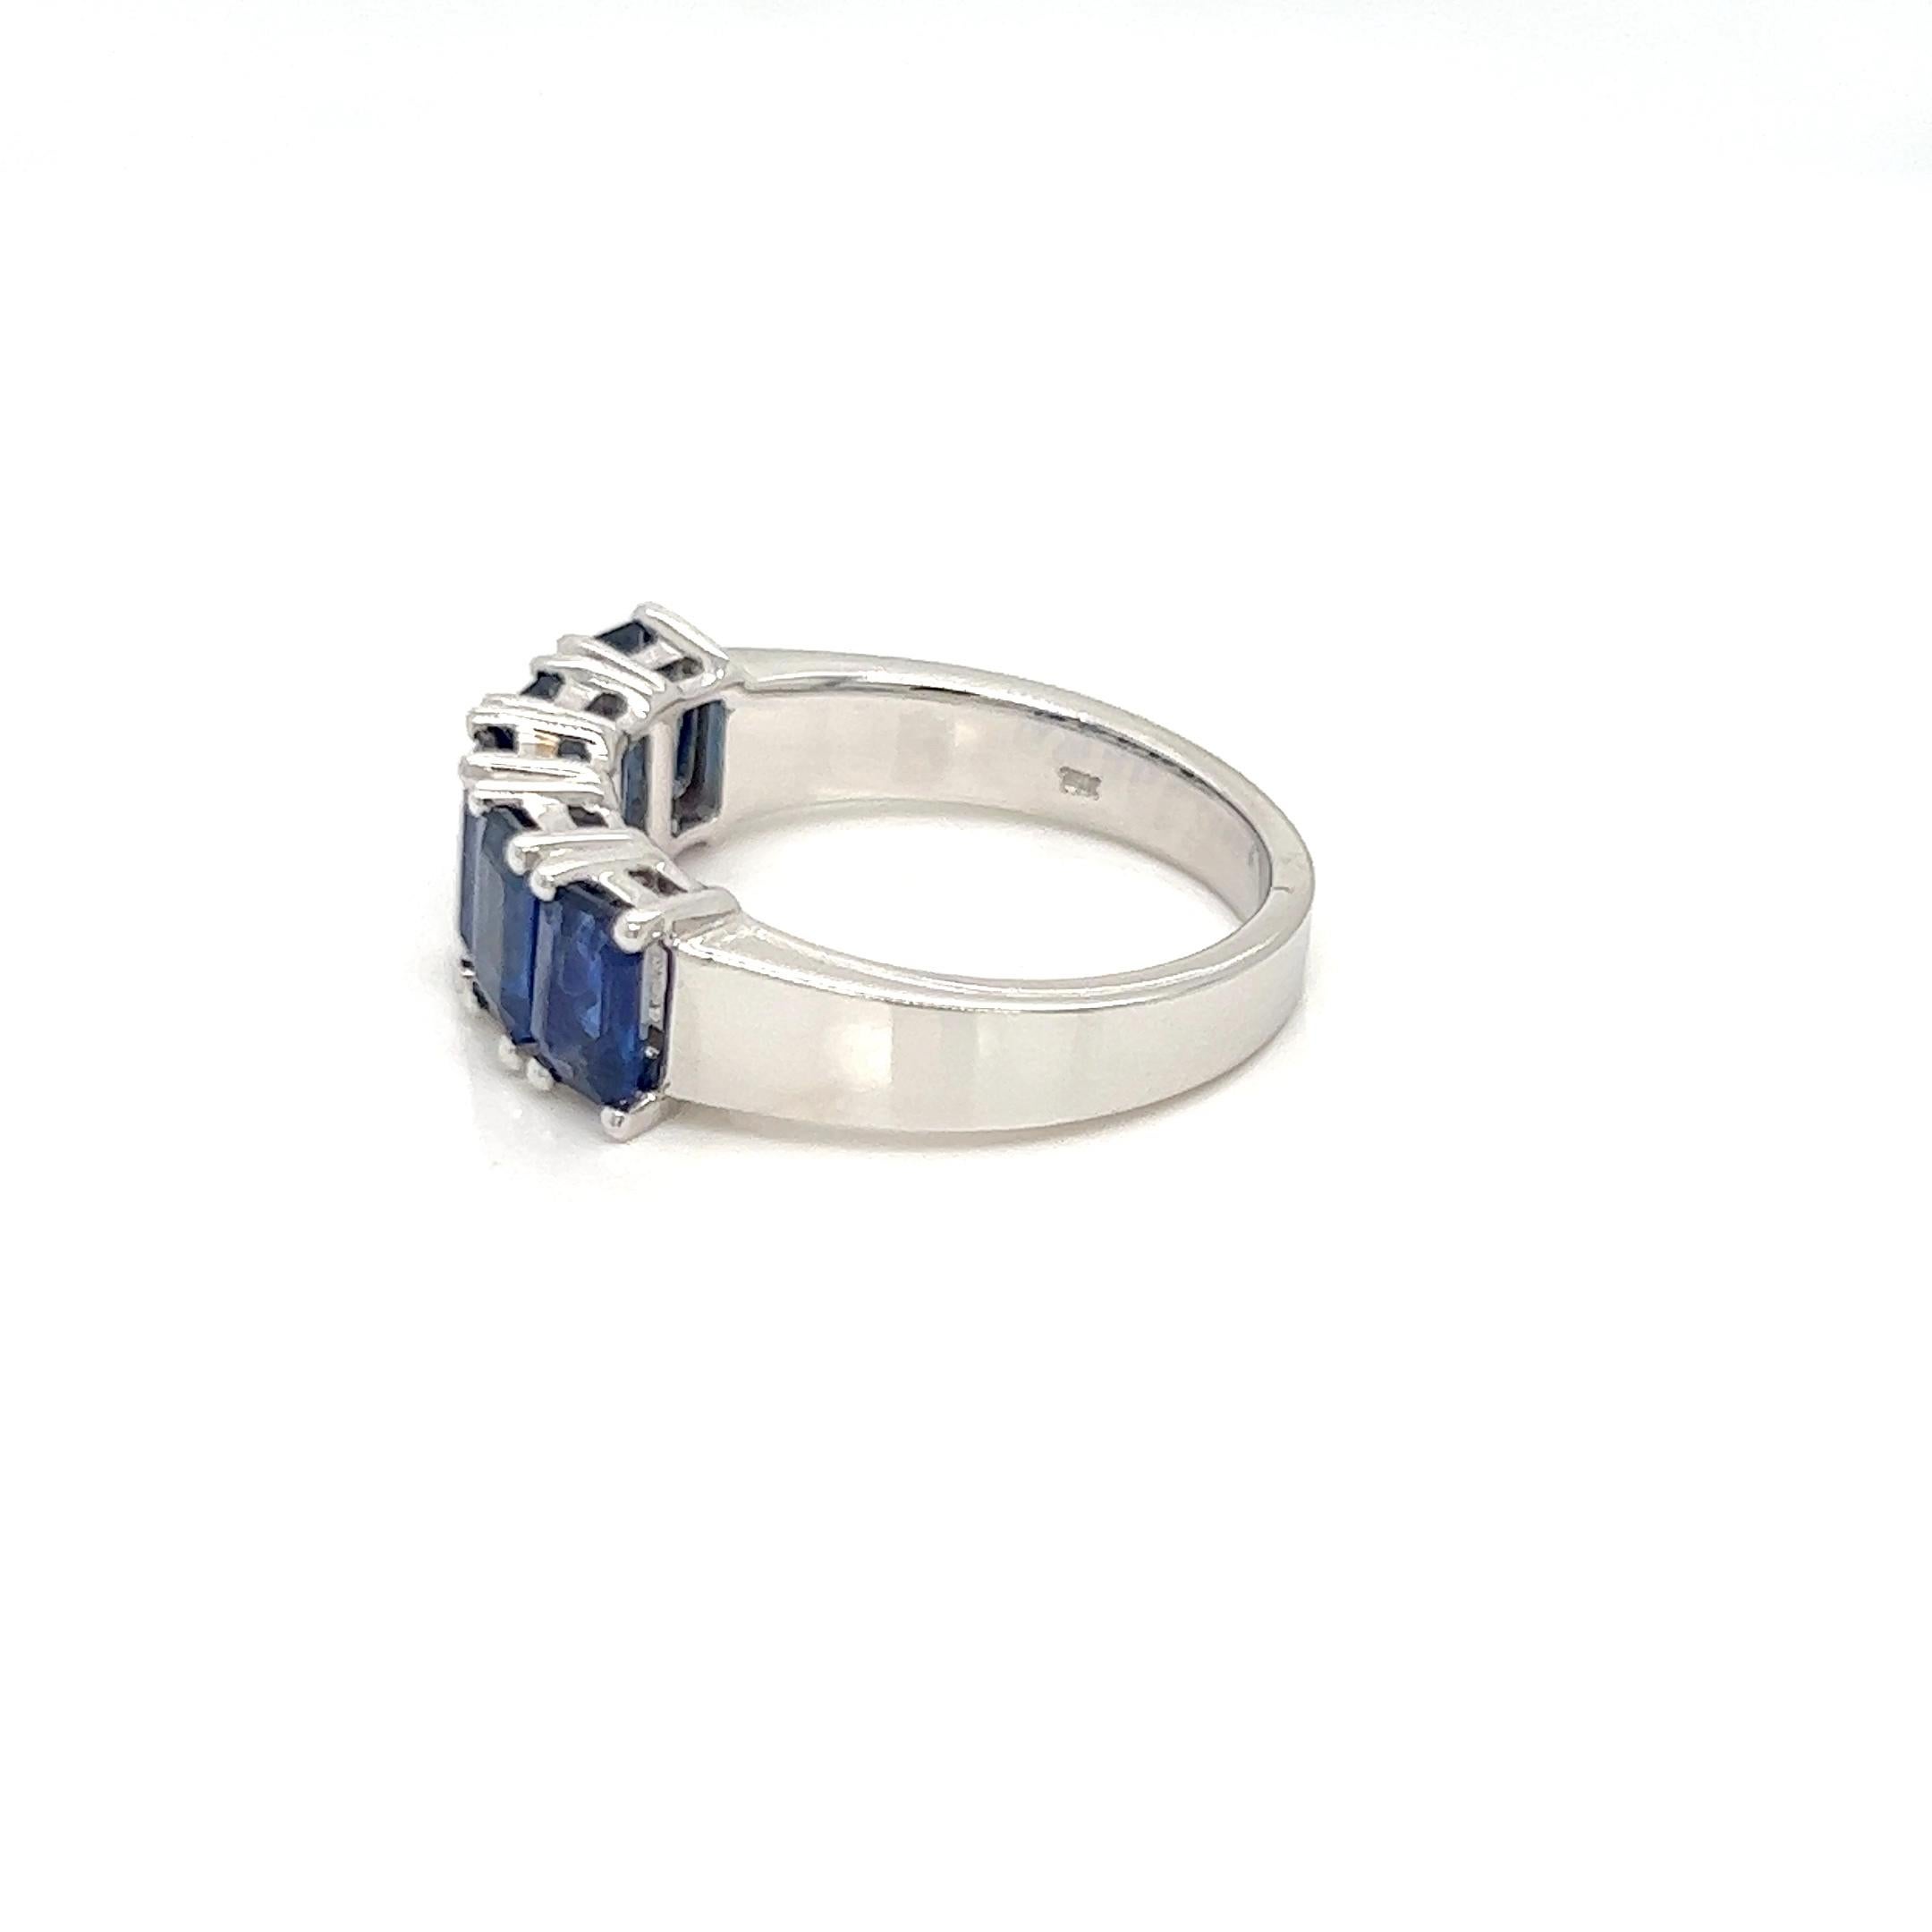 For Sale:  2.89 Carats Sapphire Emerald Cut Eternity Ring in 18K White Gold 3